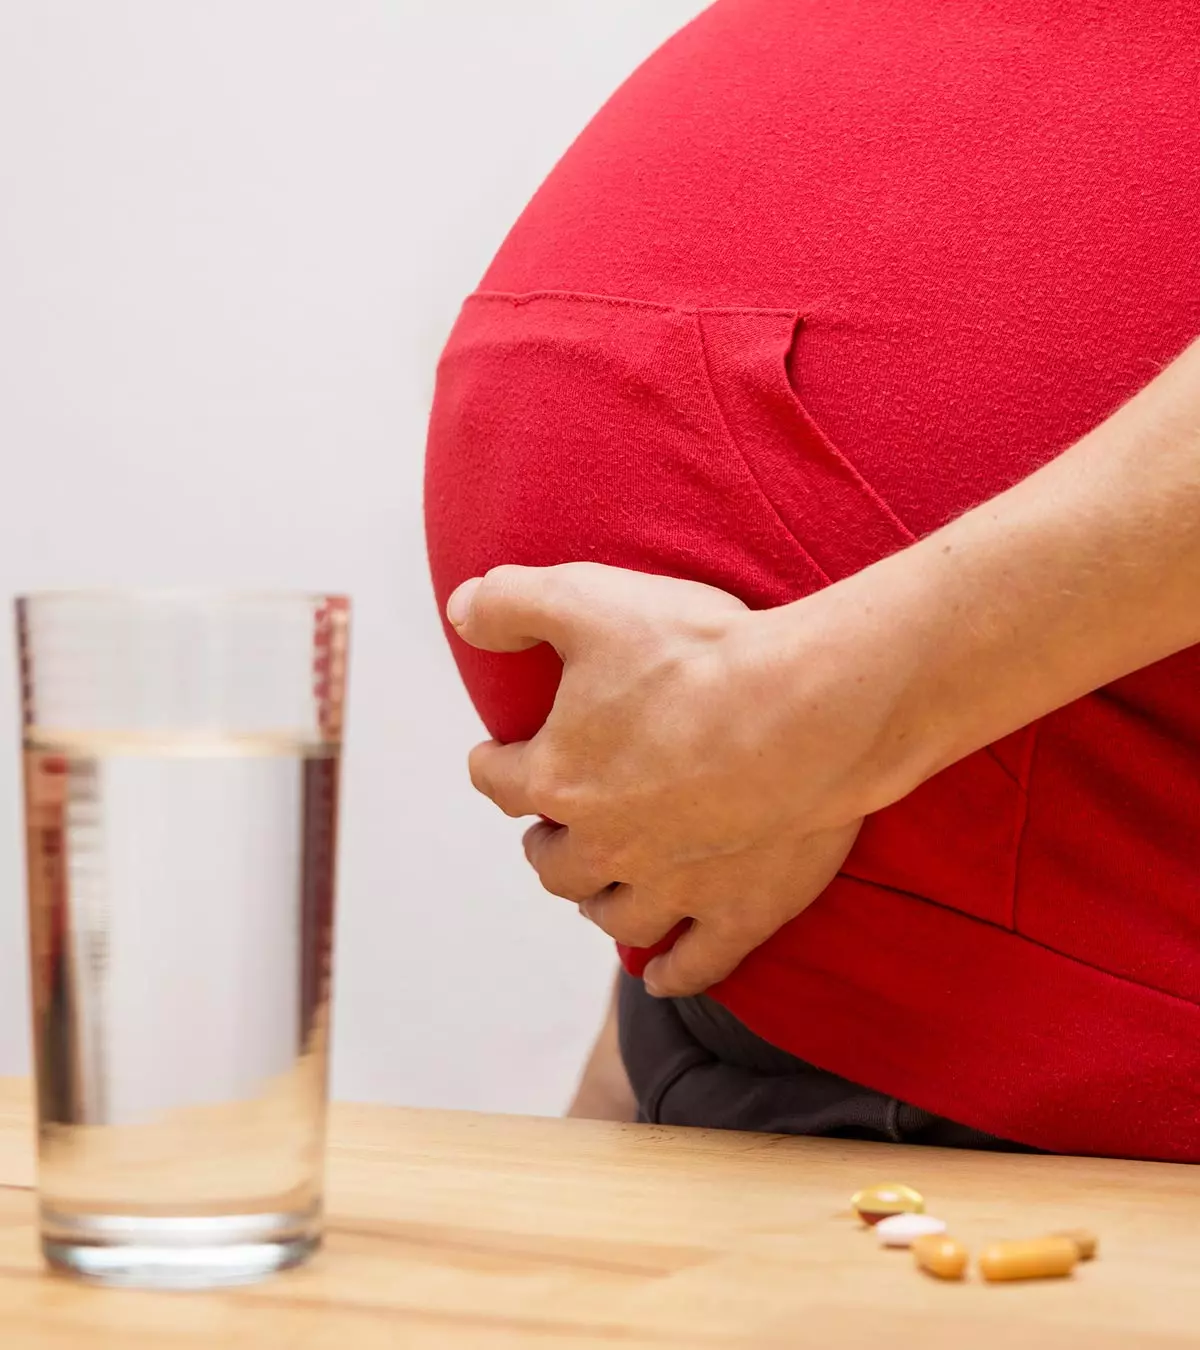 Is It Safe To Use Glucosamine When Pregnant?